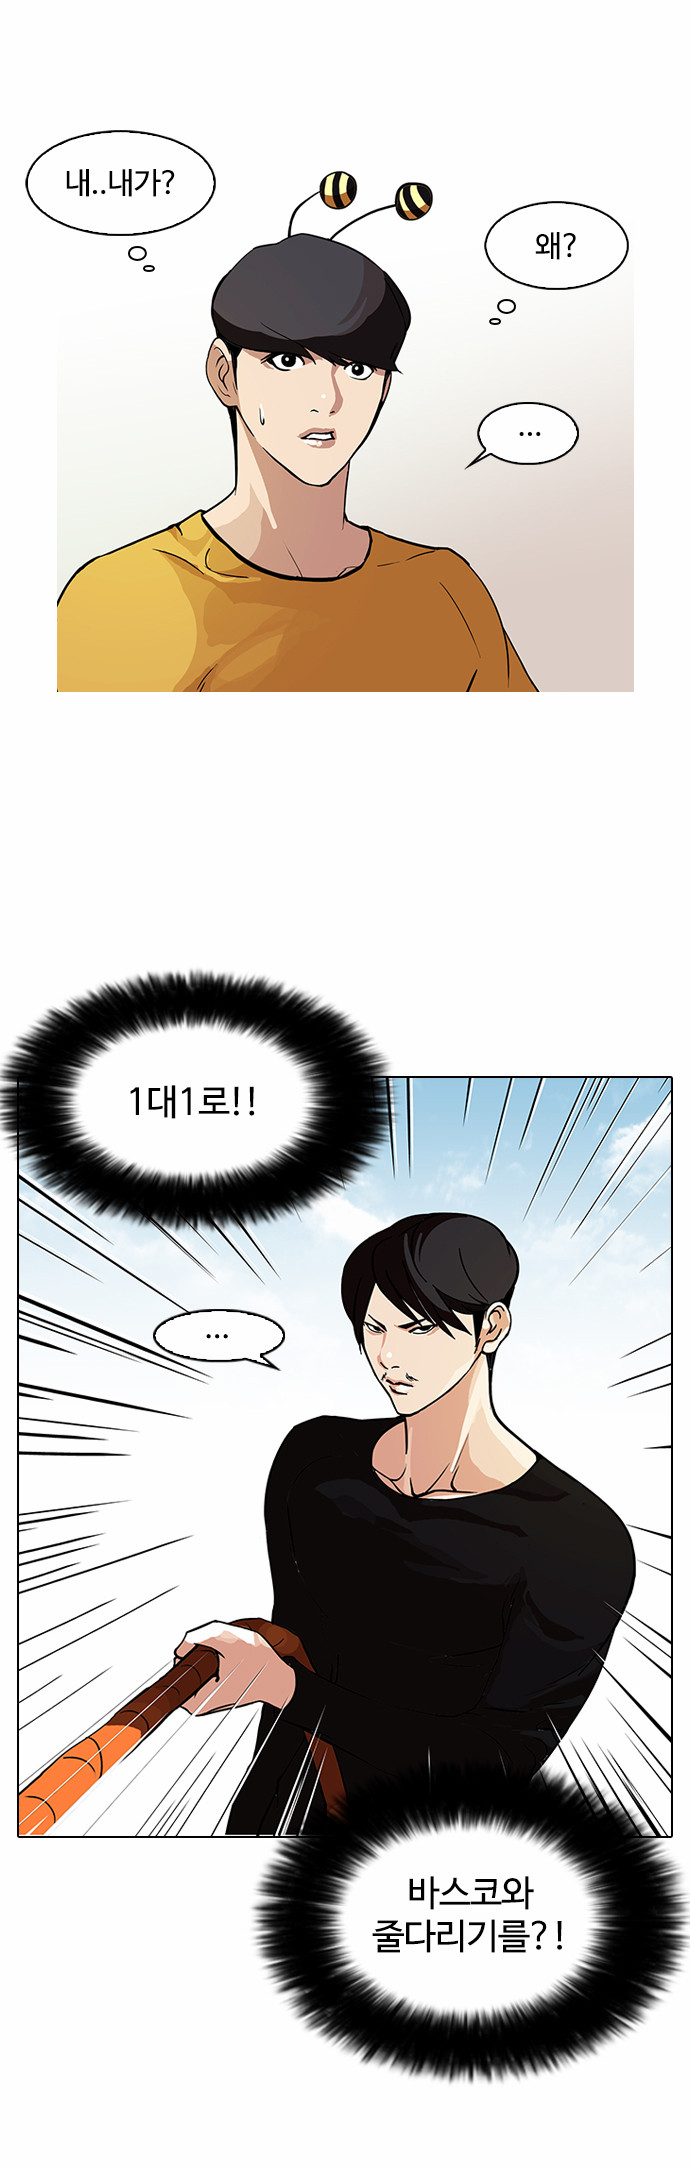 Lookism - Chapter 92 - Page 2